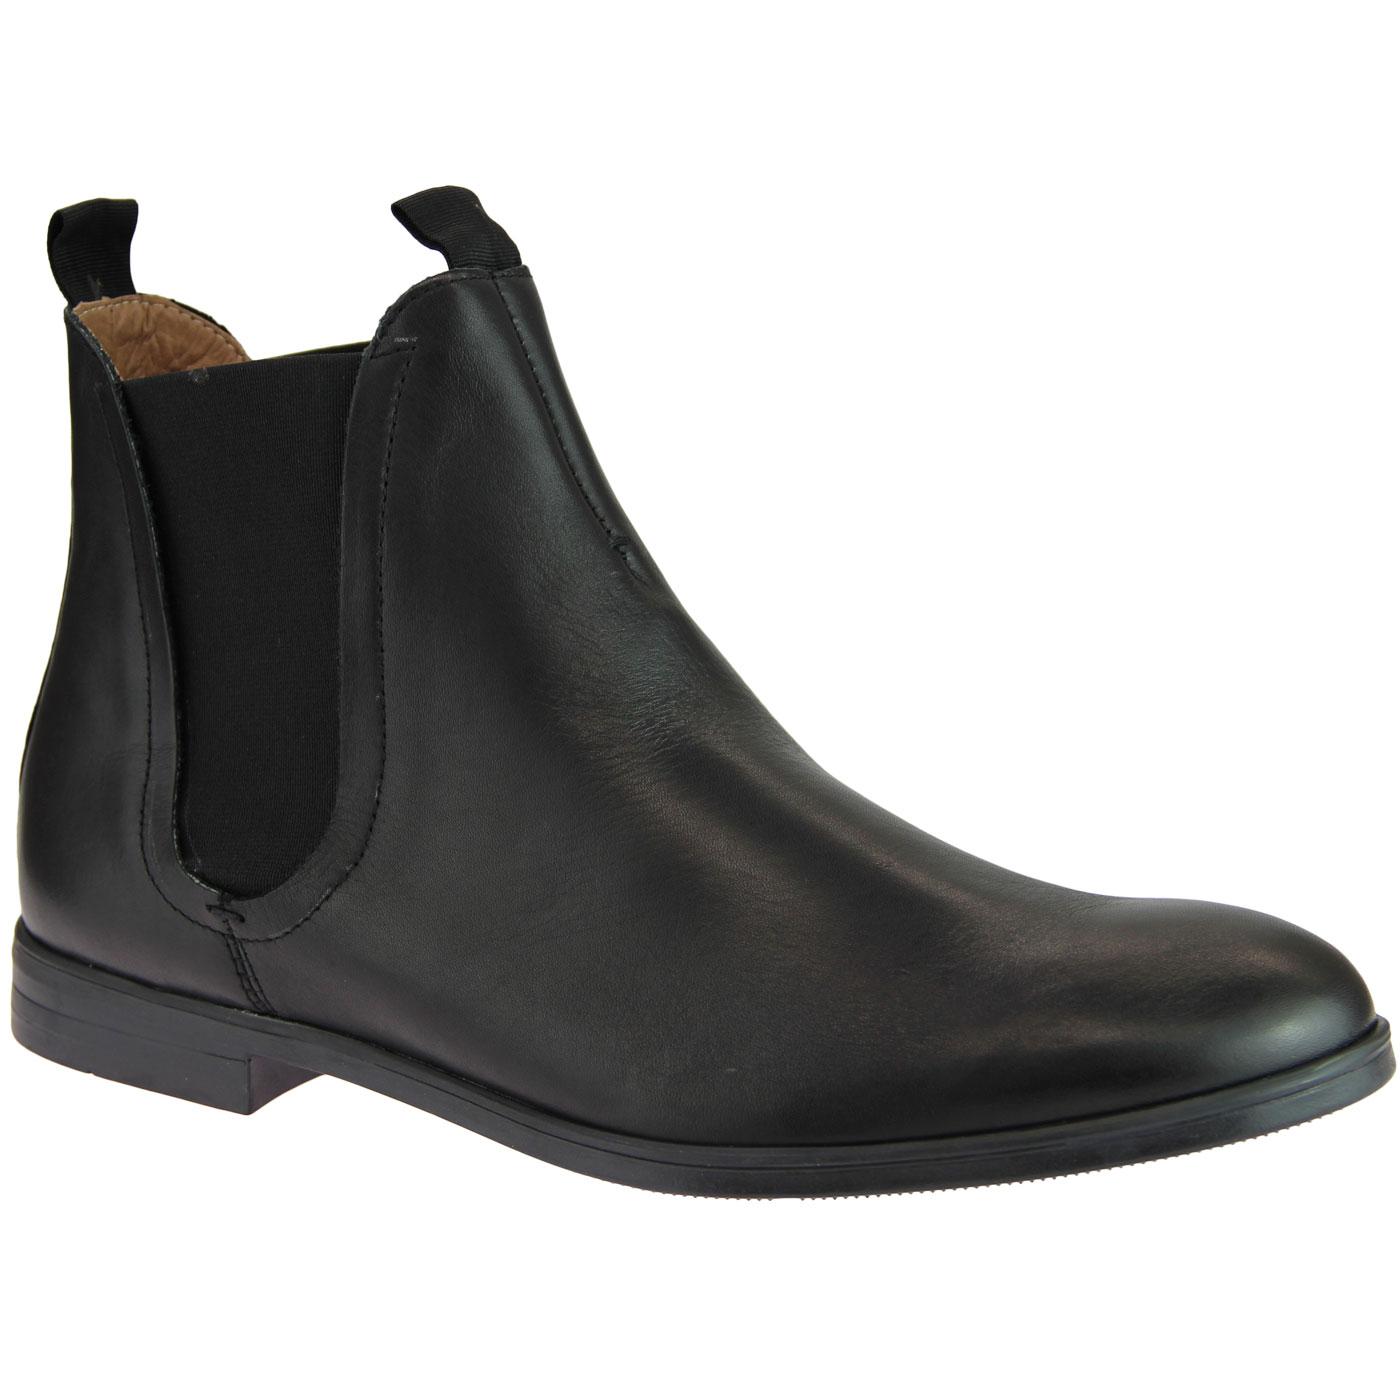 HUDSON Atherstone Retro Mod Leather Chelsea Boots in Black